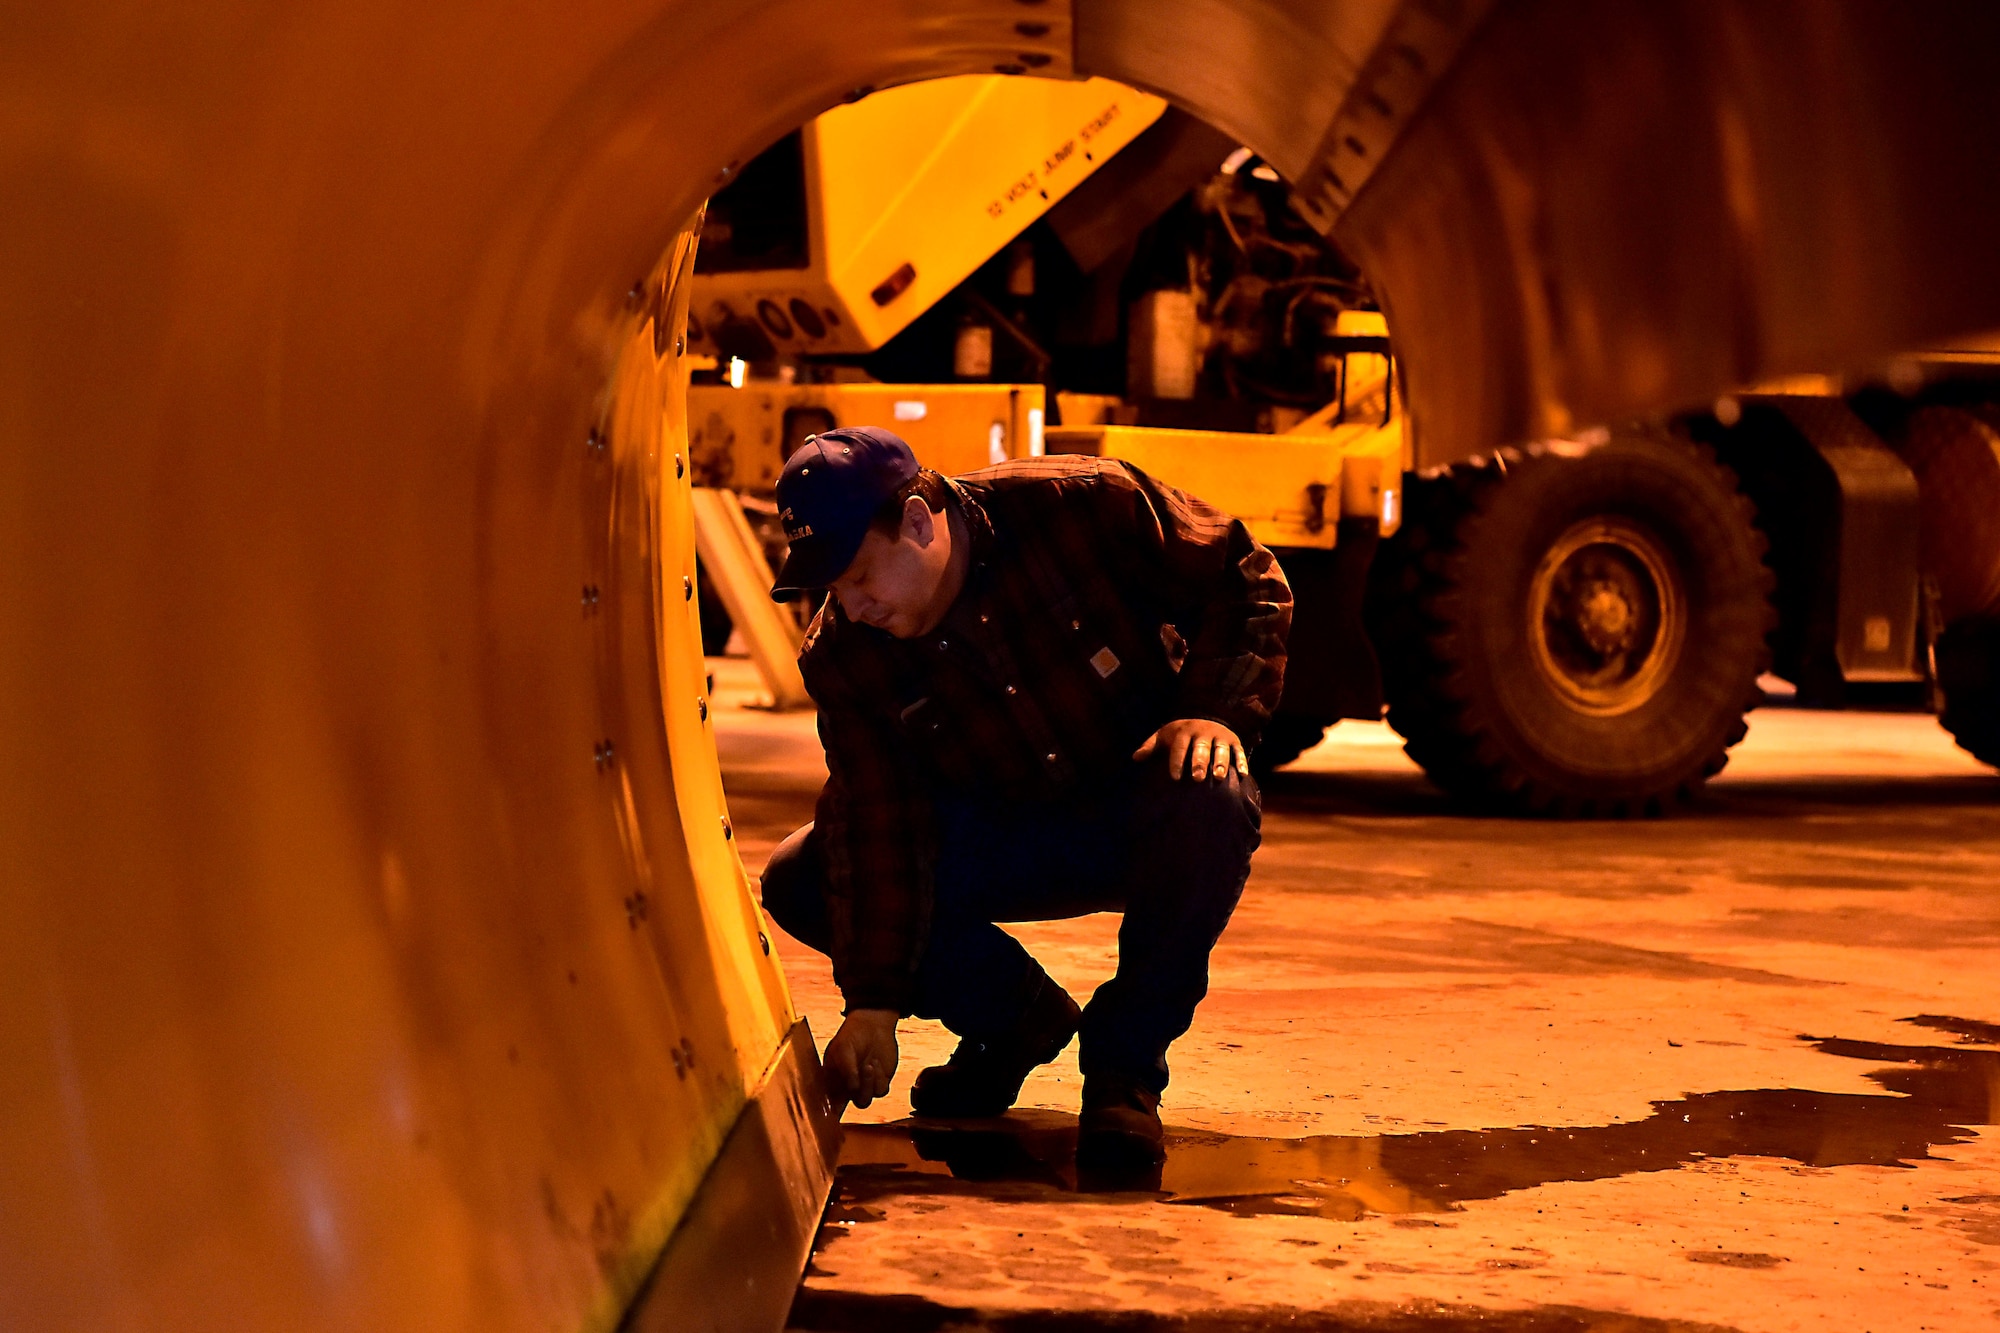 John Kowalski, the 354th Civil Engineer Squadron director of airfield snow removal operations, checks the blade on a plow on Eielson Air Force Base, Alaska, Nov. 21, 2019. Snow barn and vehicle maintenance Airmen work closely together to ensure all equipment is properly maintained due to extensive use and harsh winter conditions. (U.S. Air Force photo by Senior Airman Beaux Hebert)